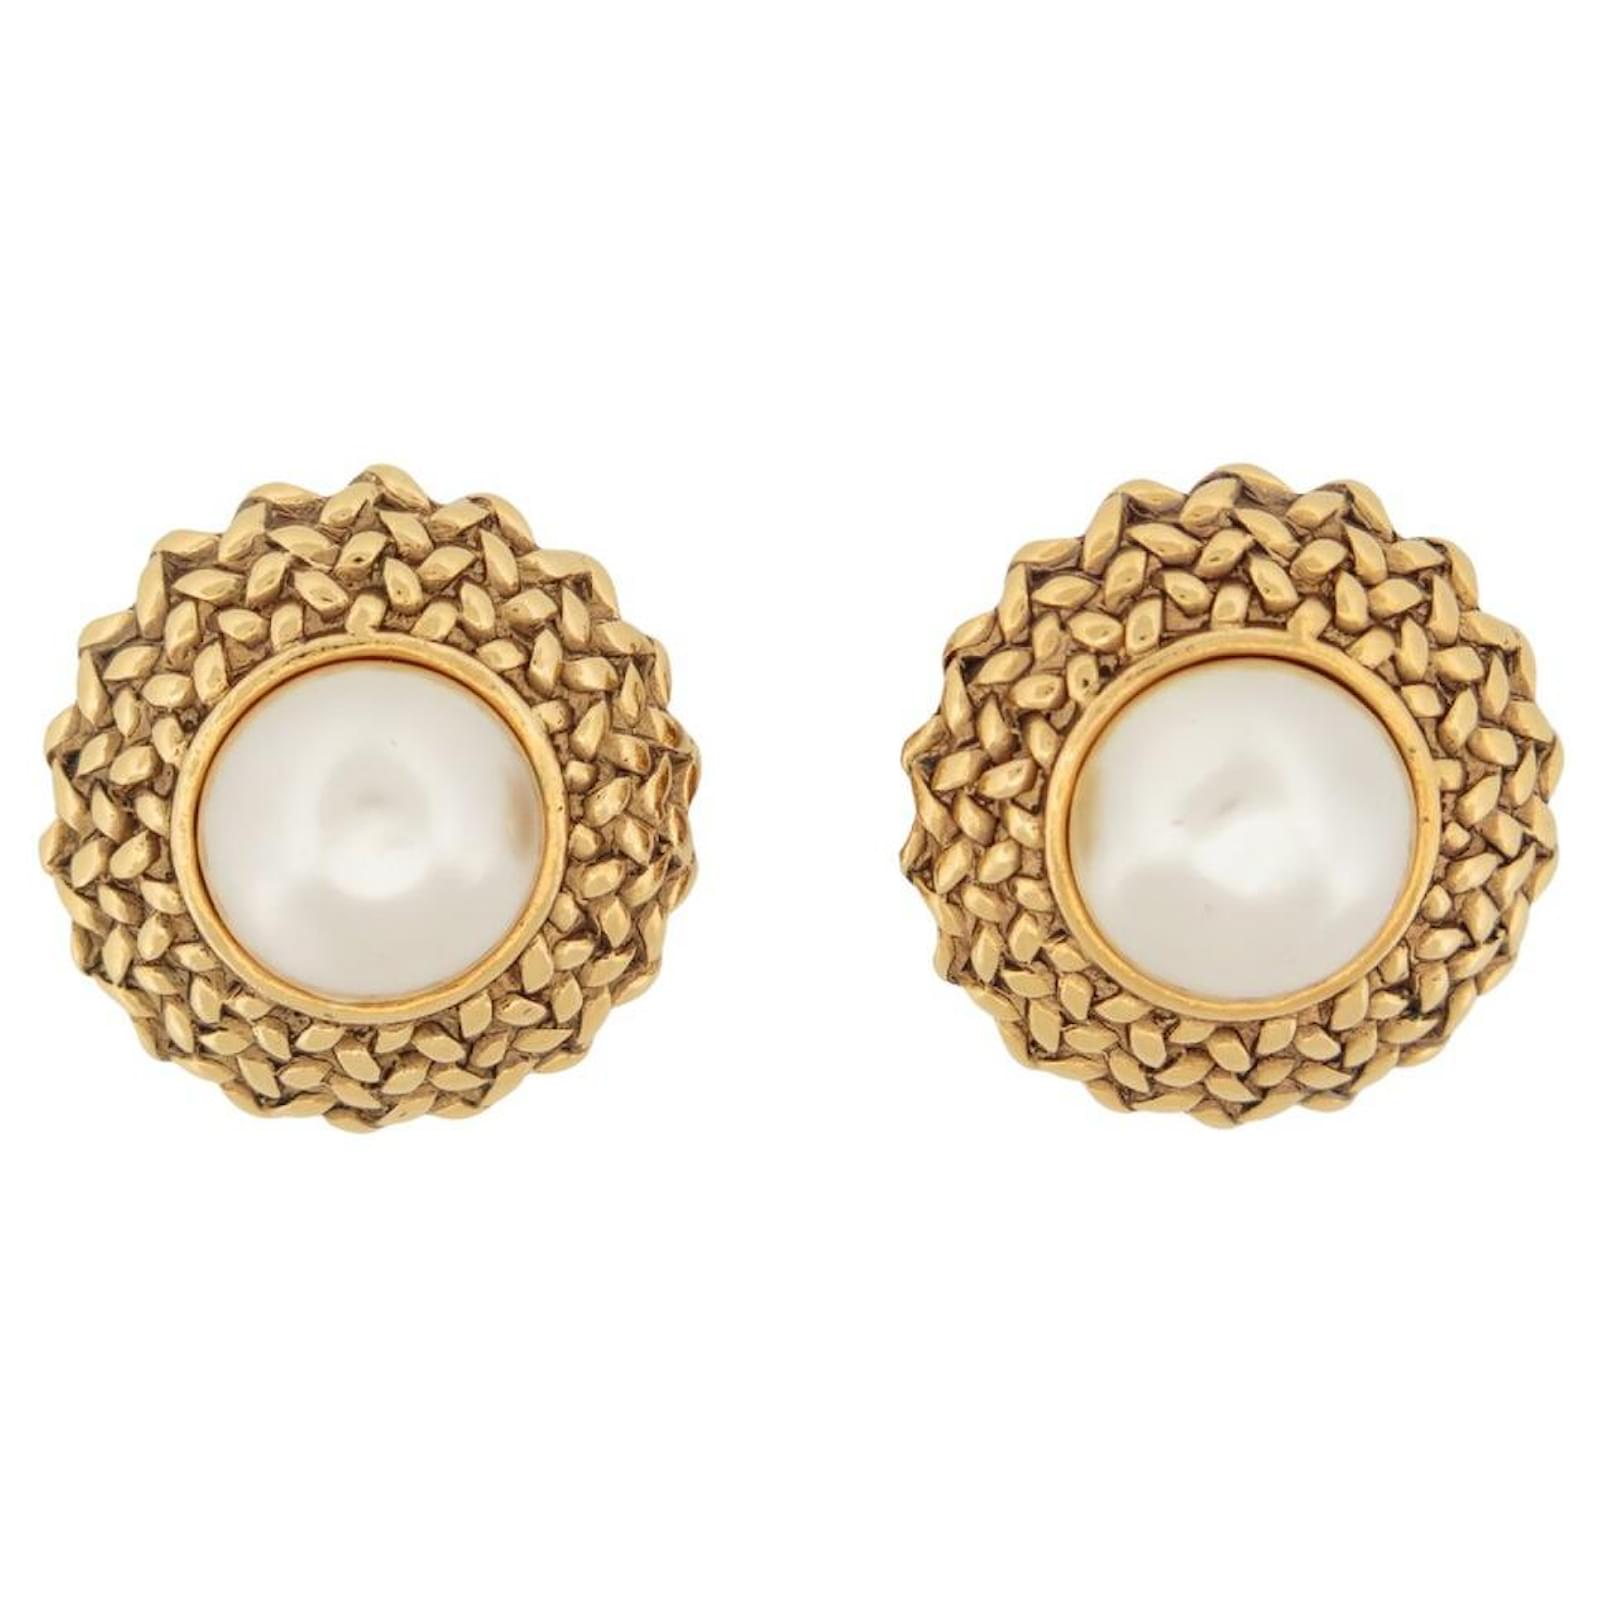 Auth CHANEL CC Logo Clip-on Round Earrings Goldtone Metal